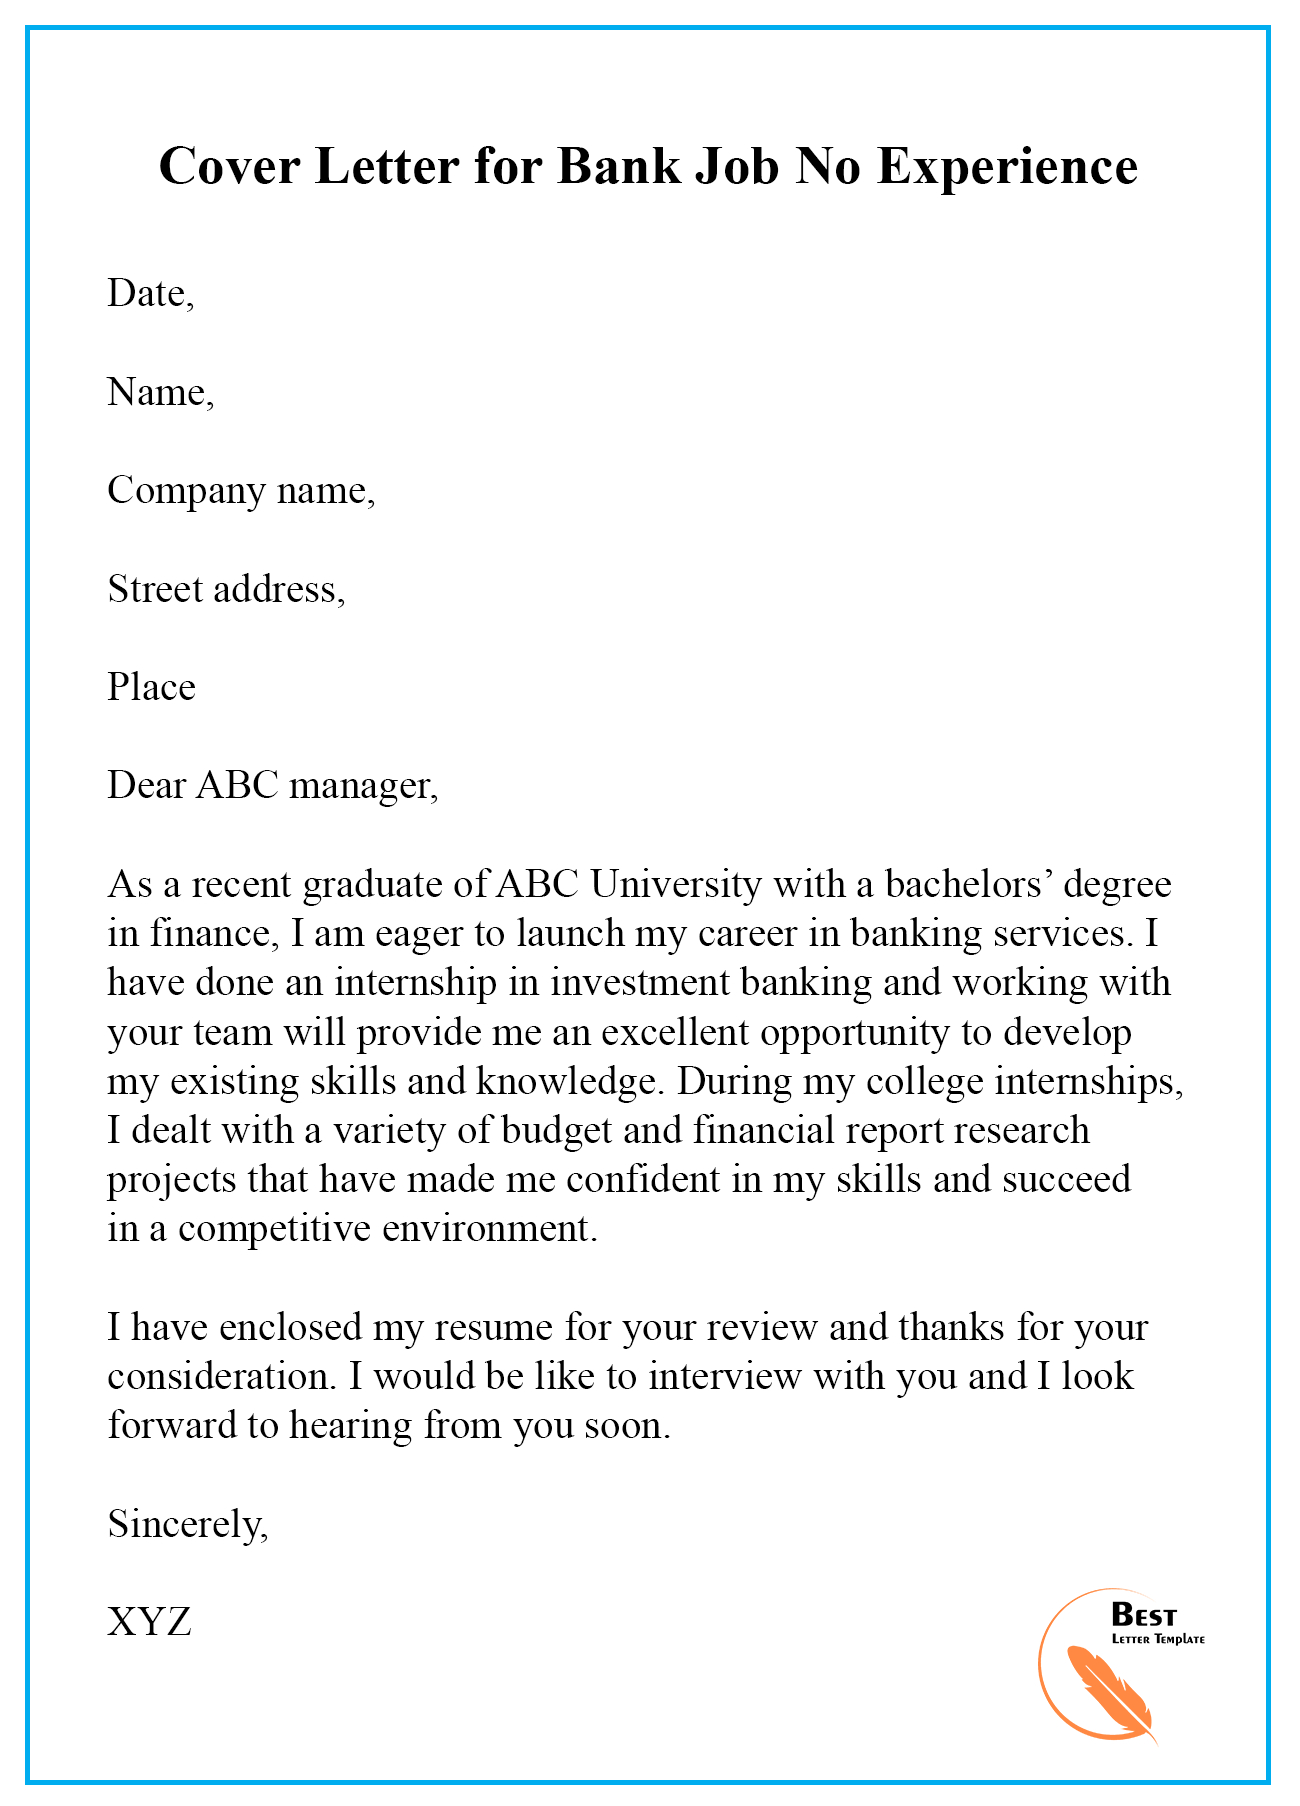 Cover Letter Template For Bank Job - 100+ Cover Letter Samples in Banking Cover Letter Template